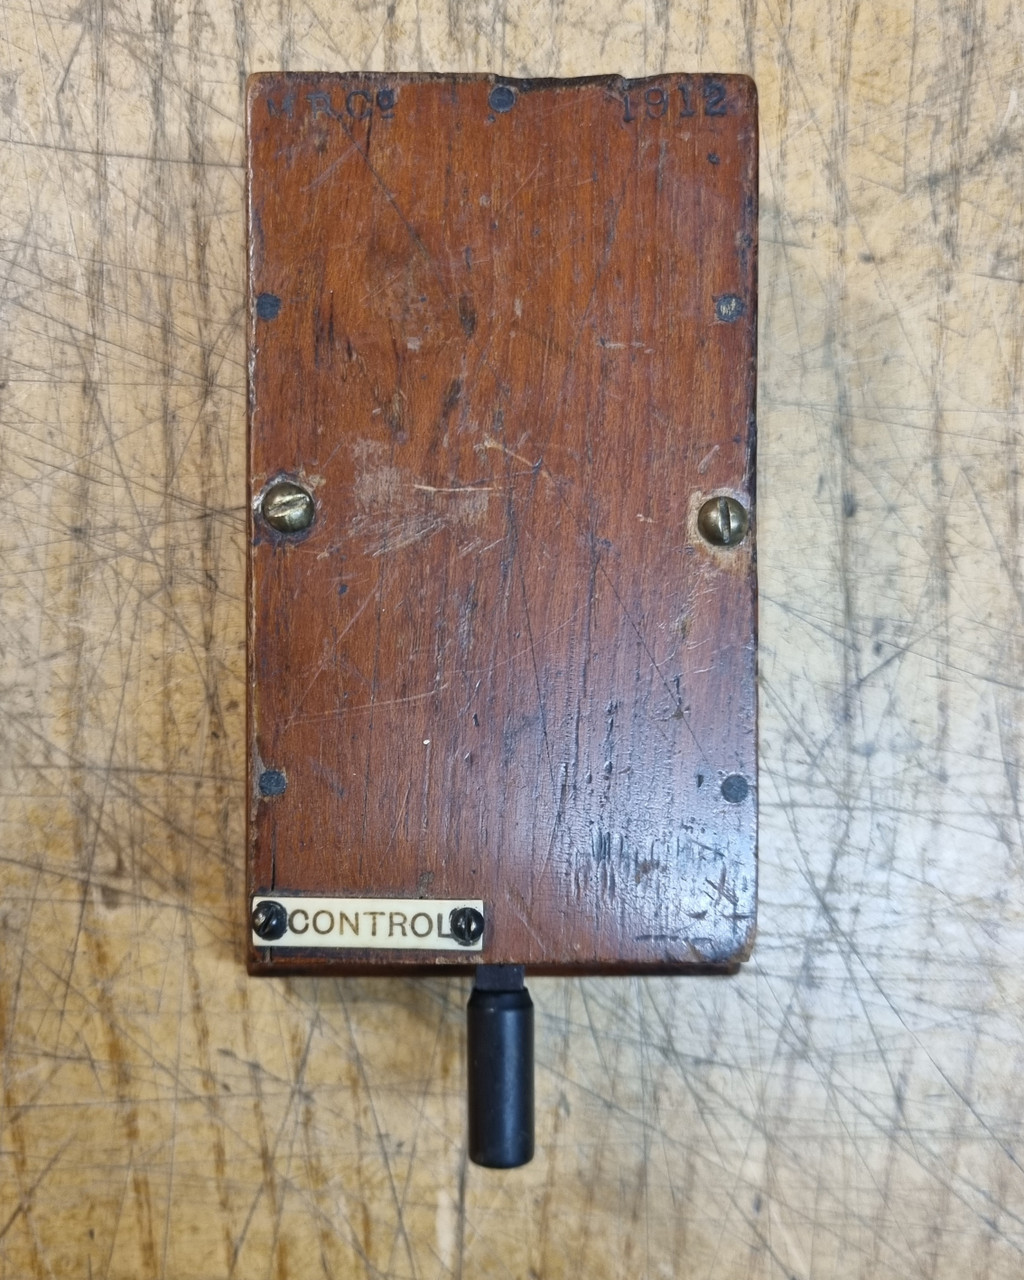 RA 6921A  SMALL SIGNAL BOX CALL SWITCH PLATED "CONTROL"